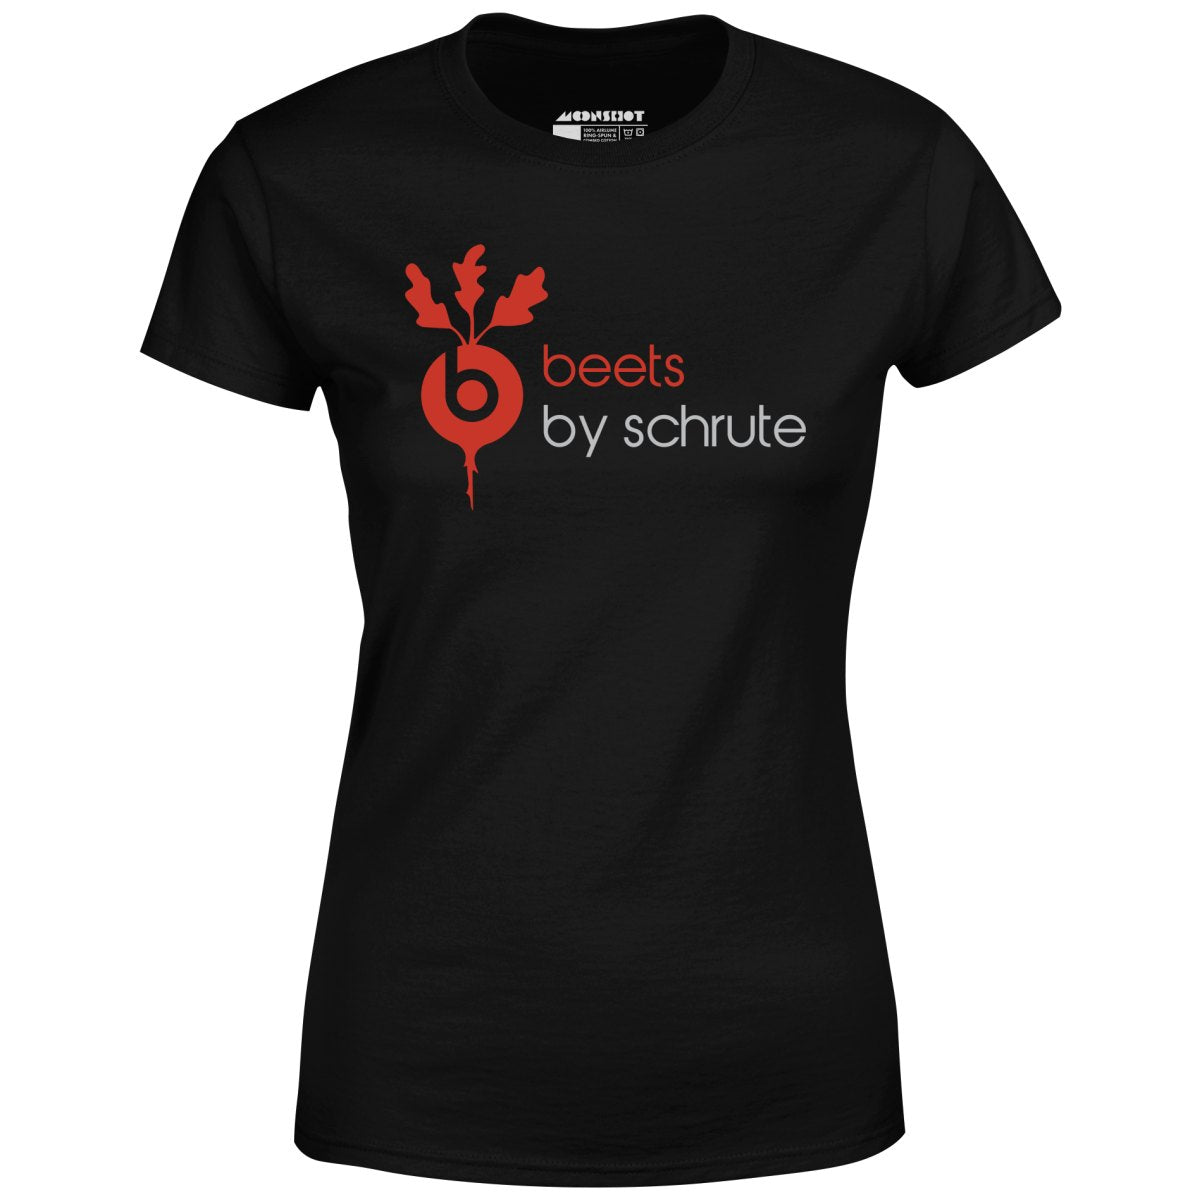 Beets by Schrute - Women's T-Shirt